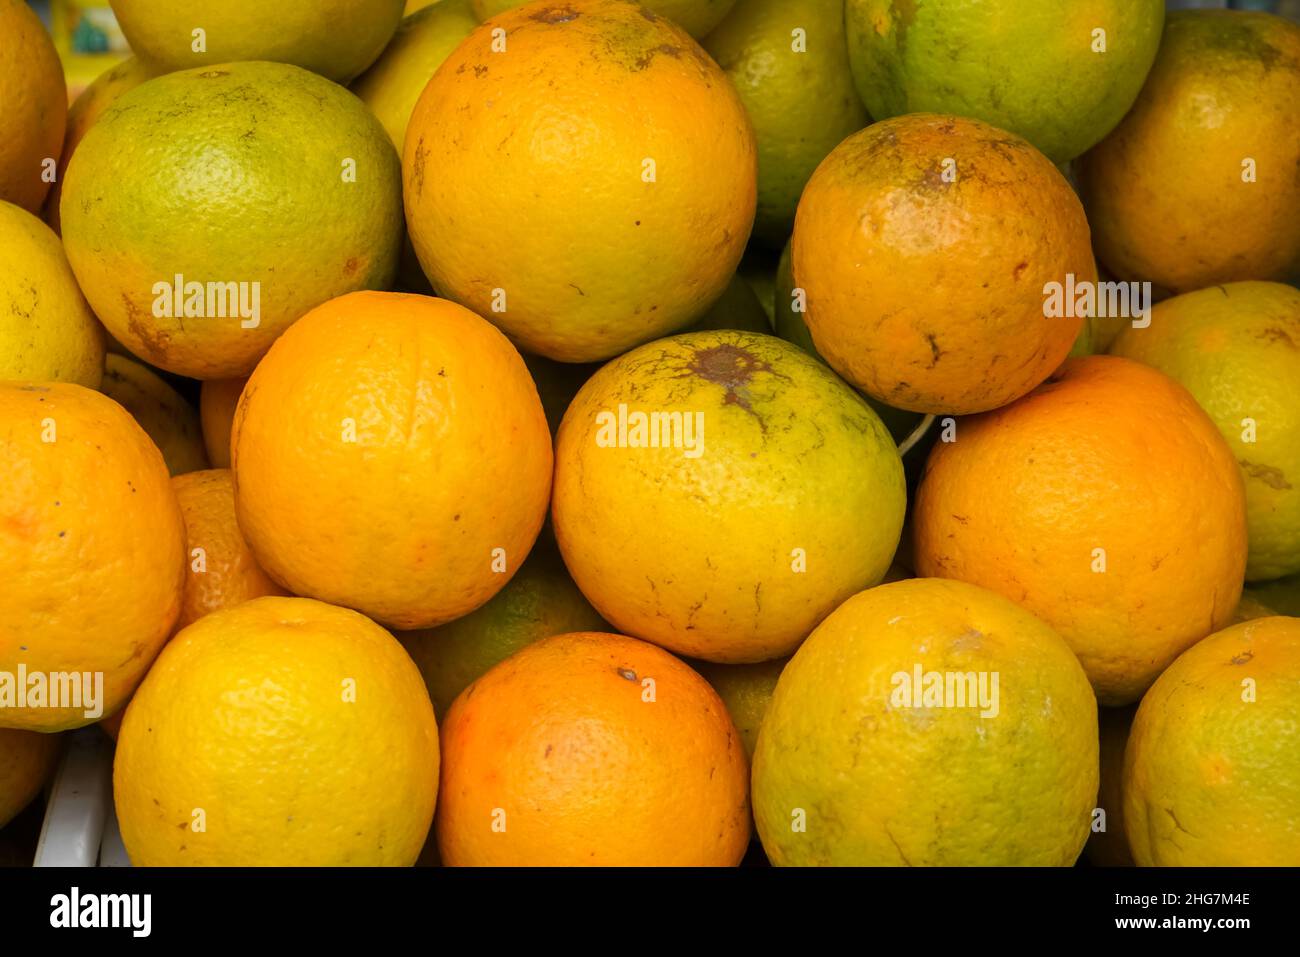 https://c8.alamy.com/comp/2HG7M4E/an-orange-is-a-type-of-citrus-fruit-that-people-often-eat-oranges-are-a-very-good-source-of-vitamin-c-orange-juice-is-an-important-part-of-fruit-2HG7M4E.jpg